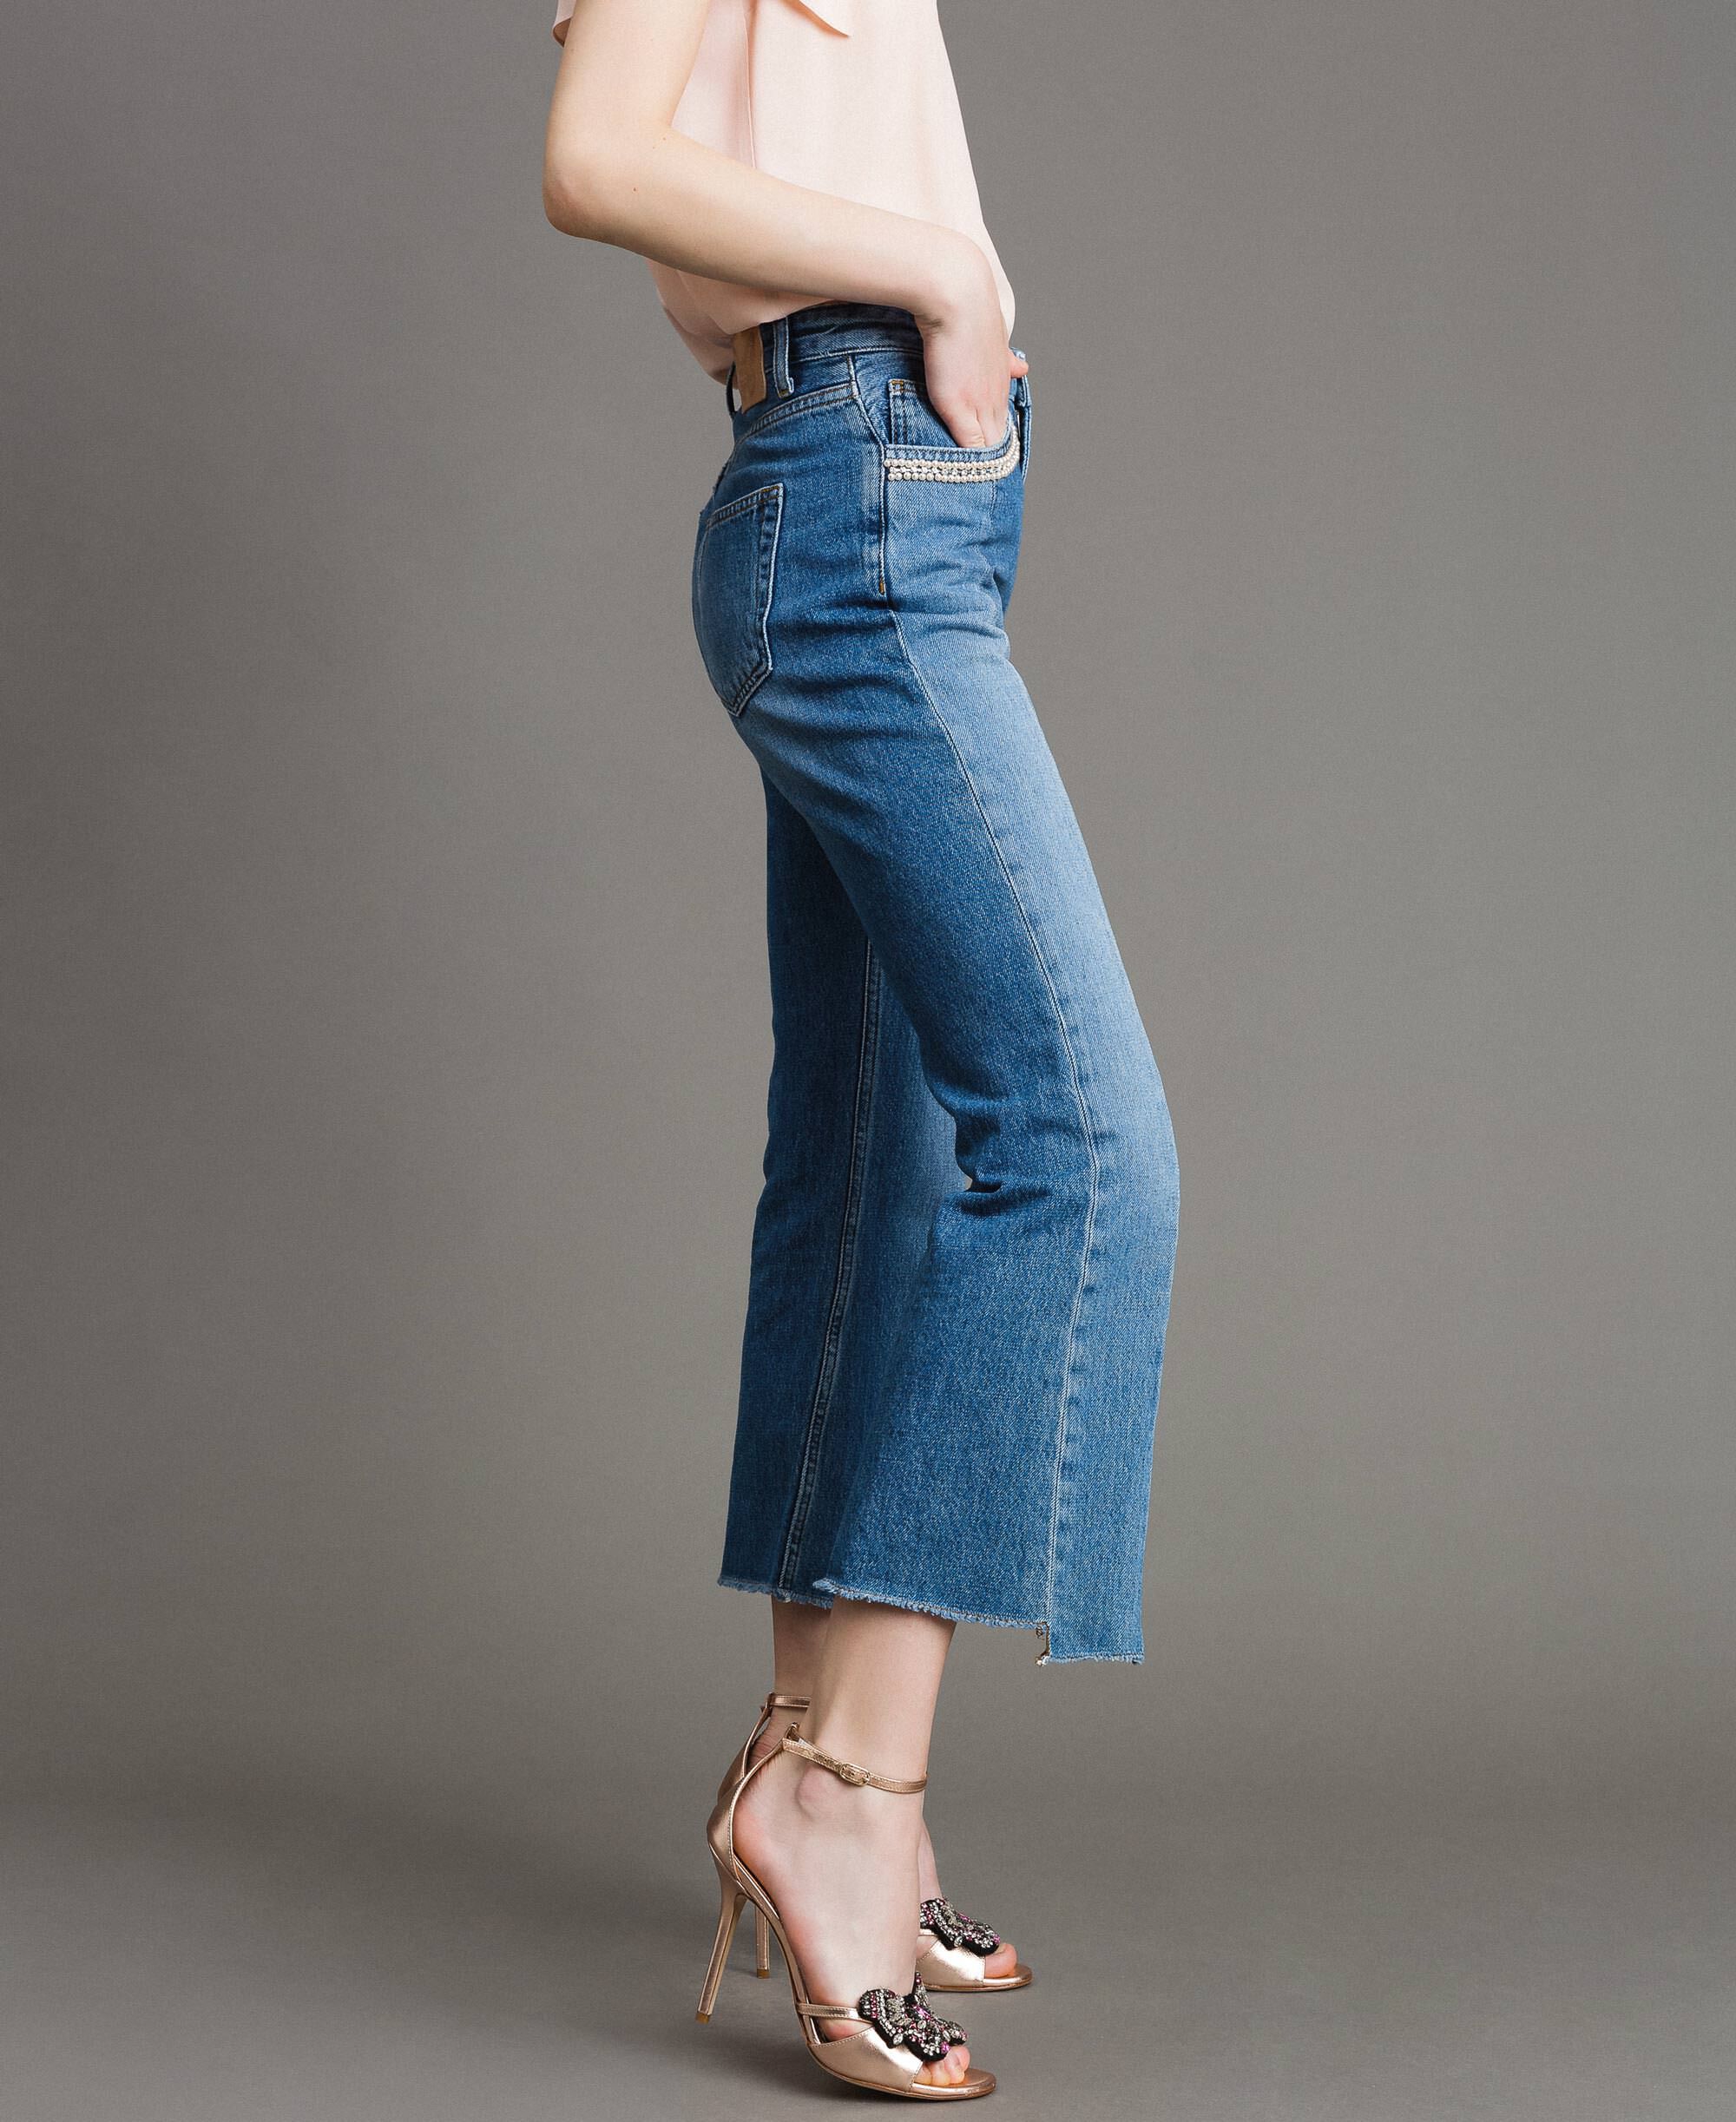 ankle bottom jeans